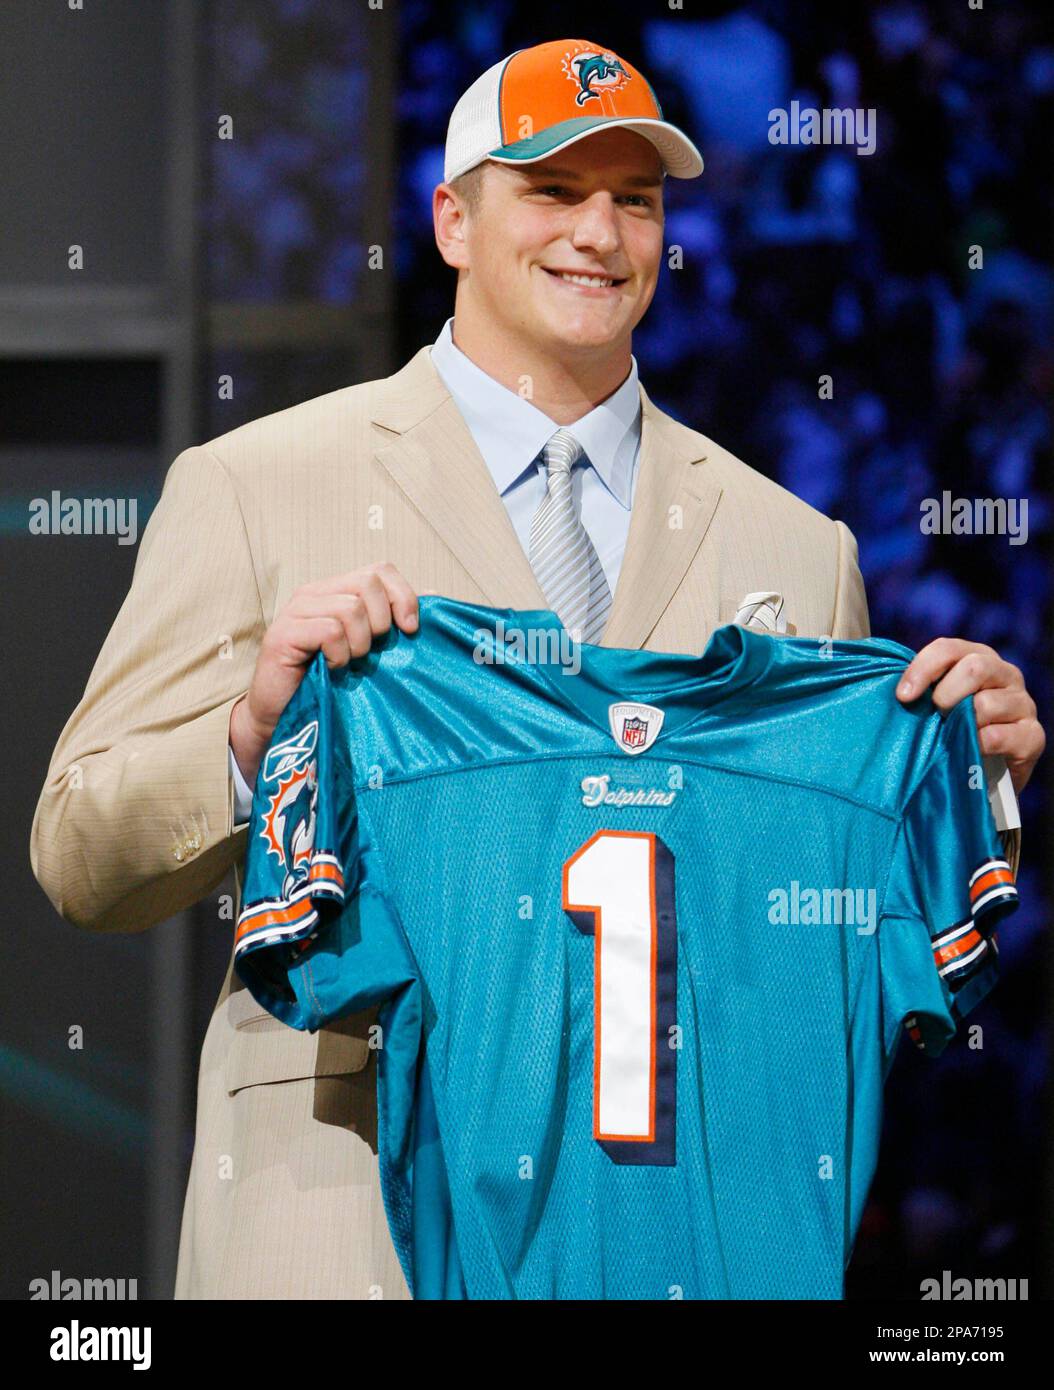 Jake Long of Michigan holds up a Miami Dolphins jersey after being  announced as the number one pick in the NFL Draft Saturday, April 26, 2008  in New York. (AP Photo/Jason DeCrow